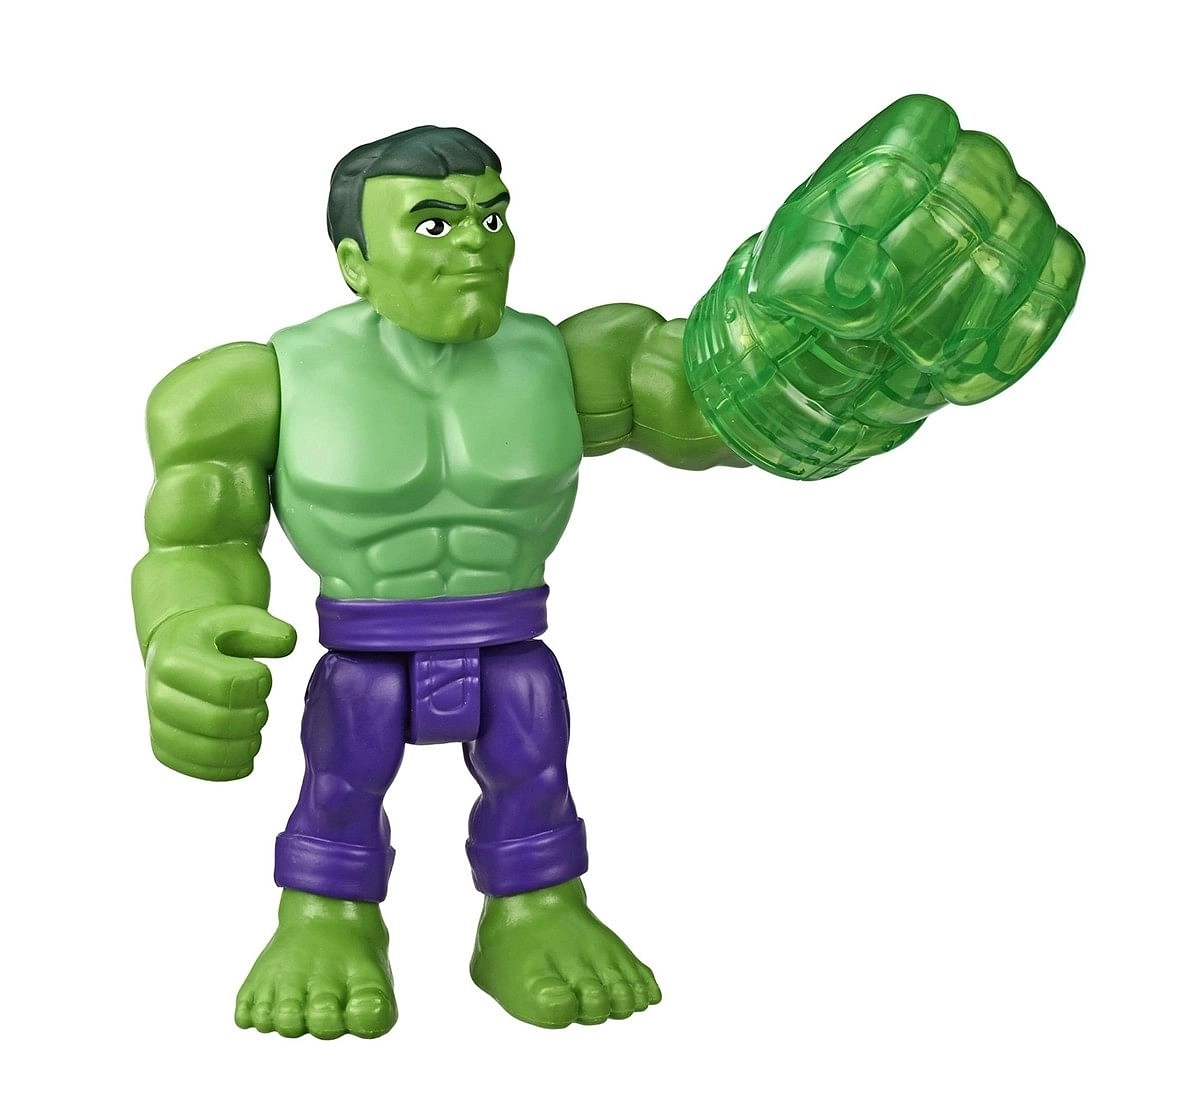 Super Hero Adventures Marvel Hulk Action Figure Assorted Activity Toys for Boys age 3Y+ (Green)